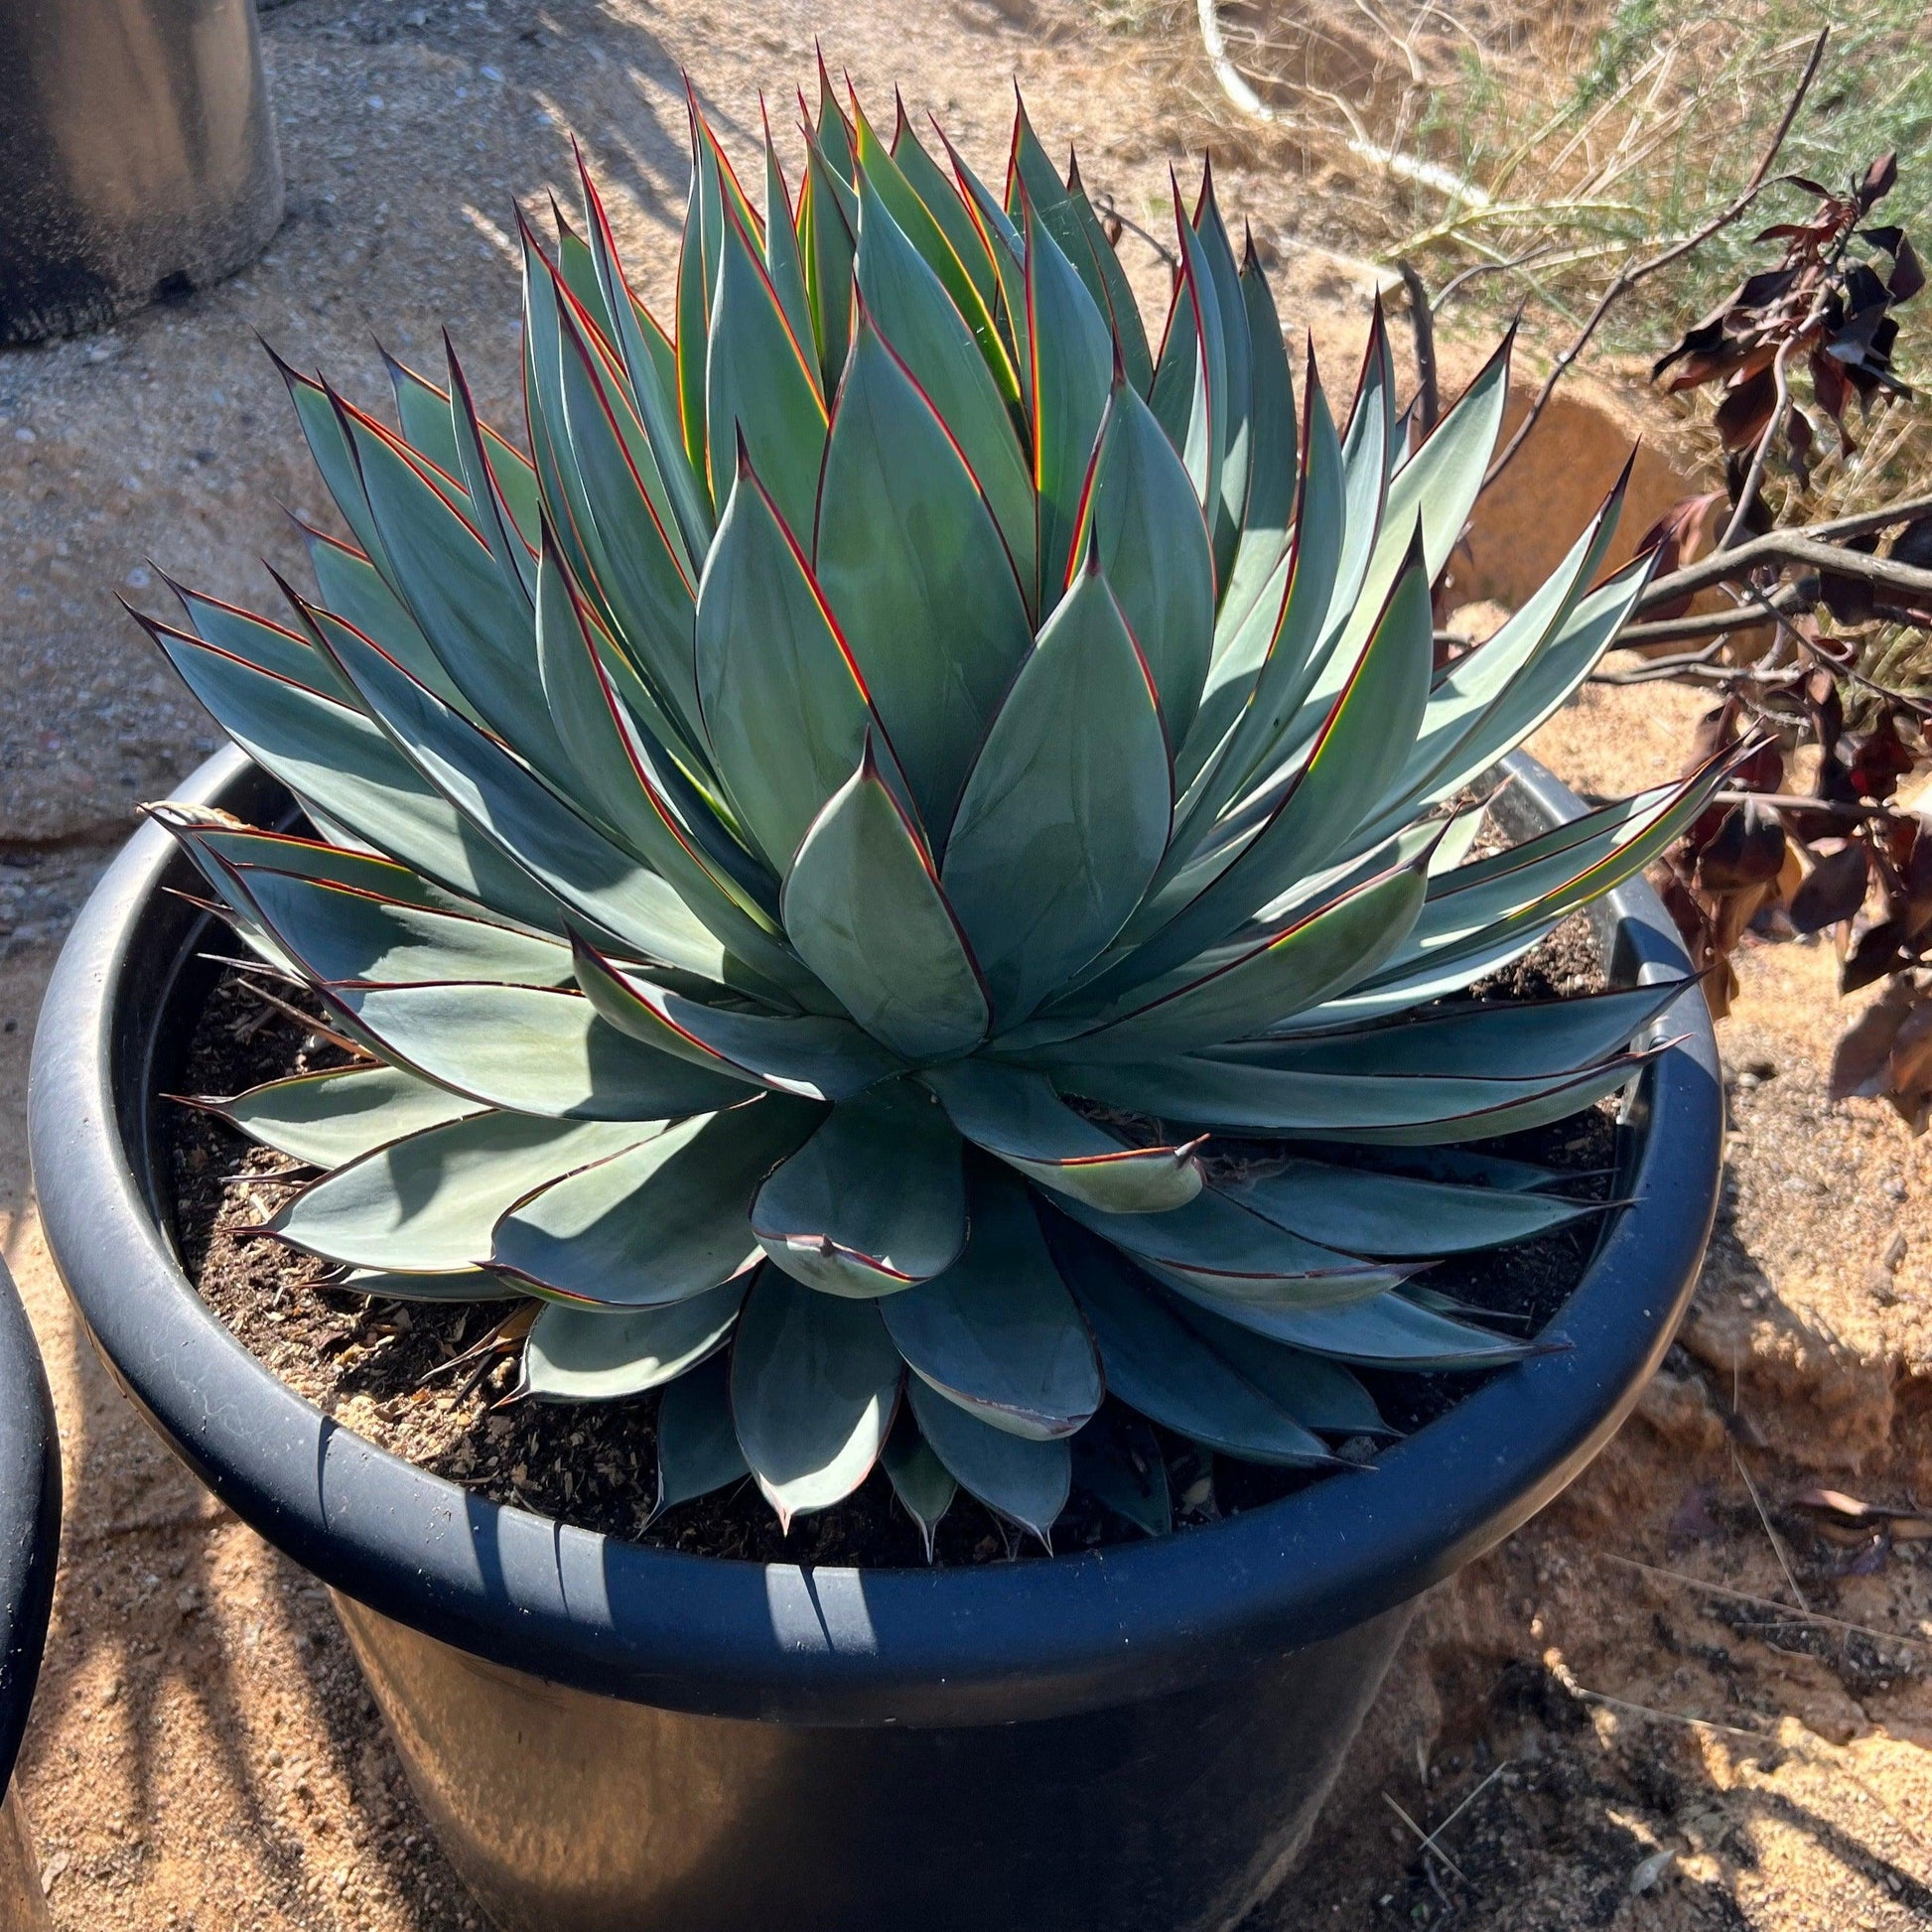 Blue Glow Agave - Agave Blue Glow - Pulled Nursery